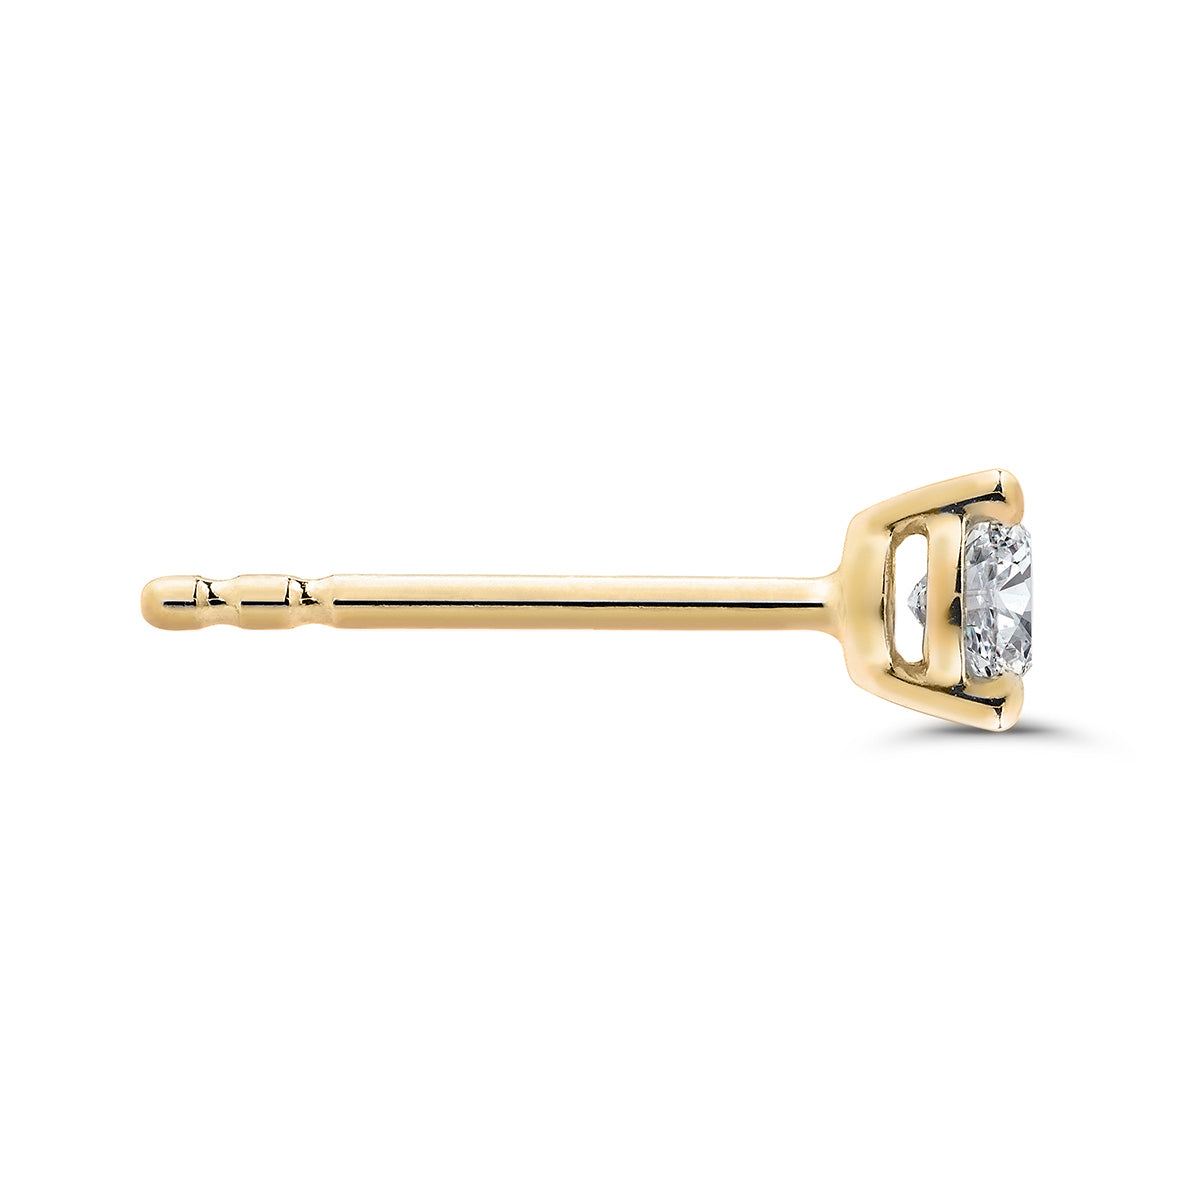 You're-a-Stud in 14K Gold